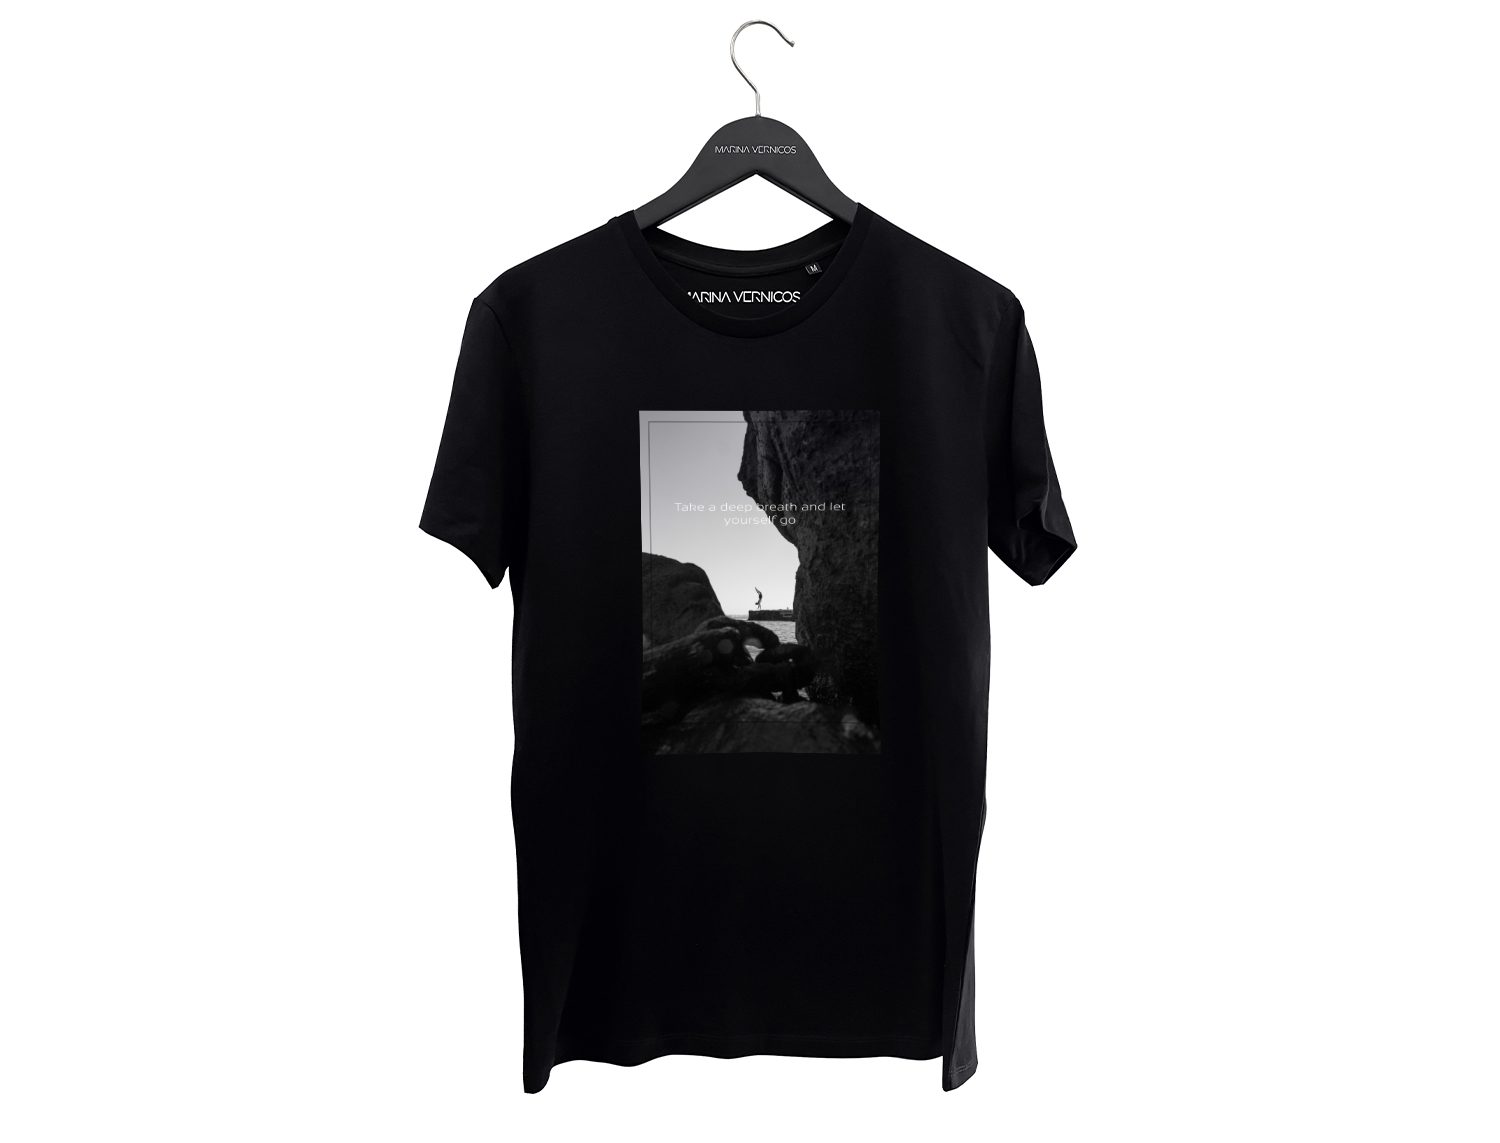 Take a deep breath and let yourself go - Black T-Shirt